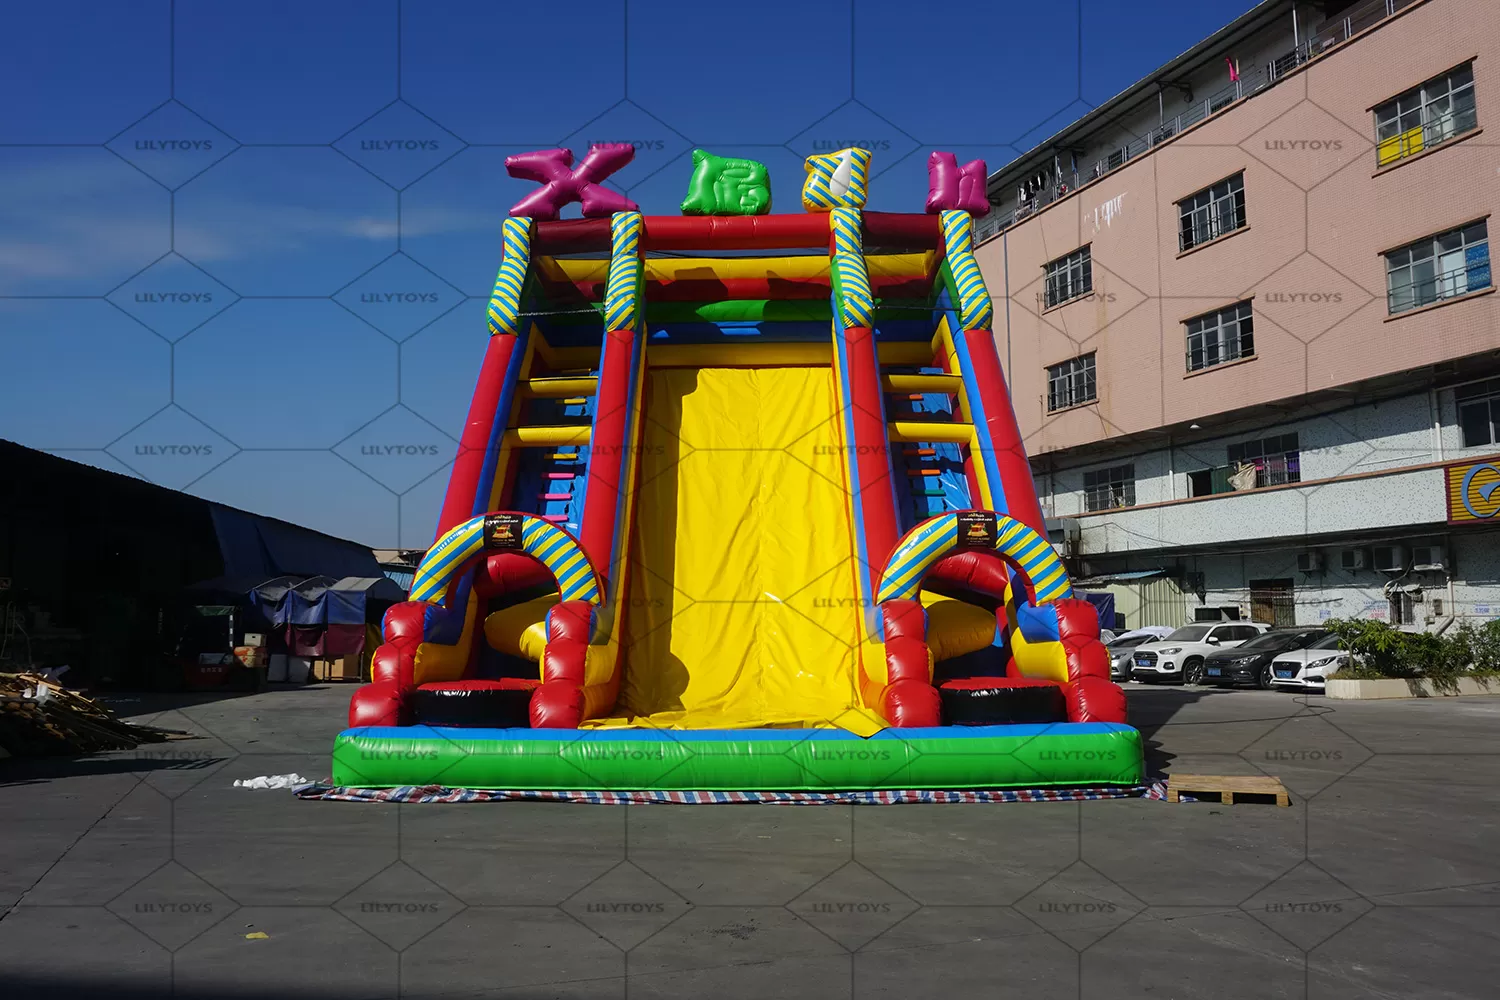 Inflatable high slide with letter